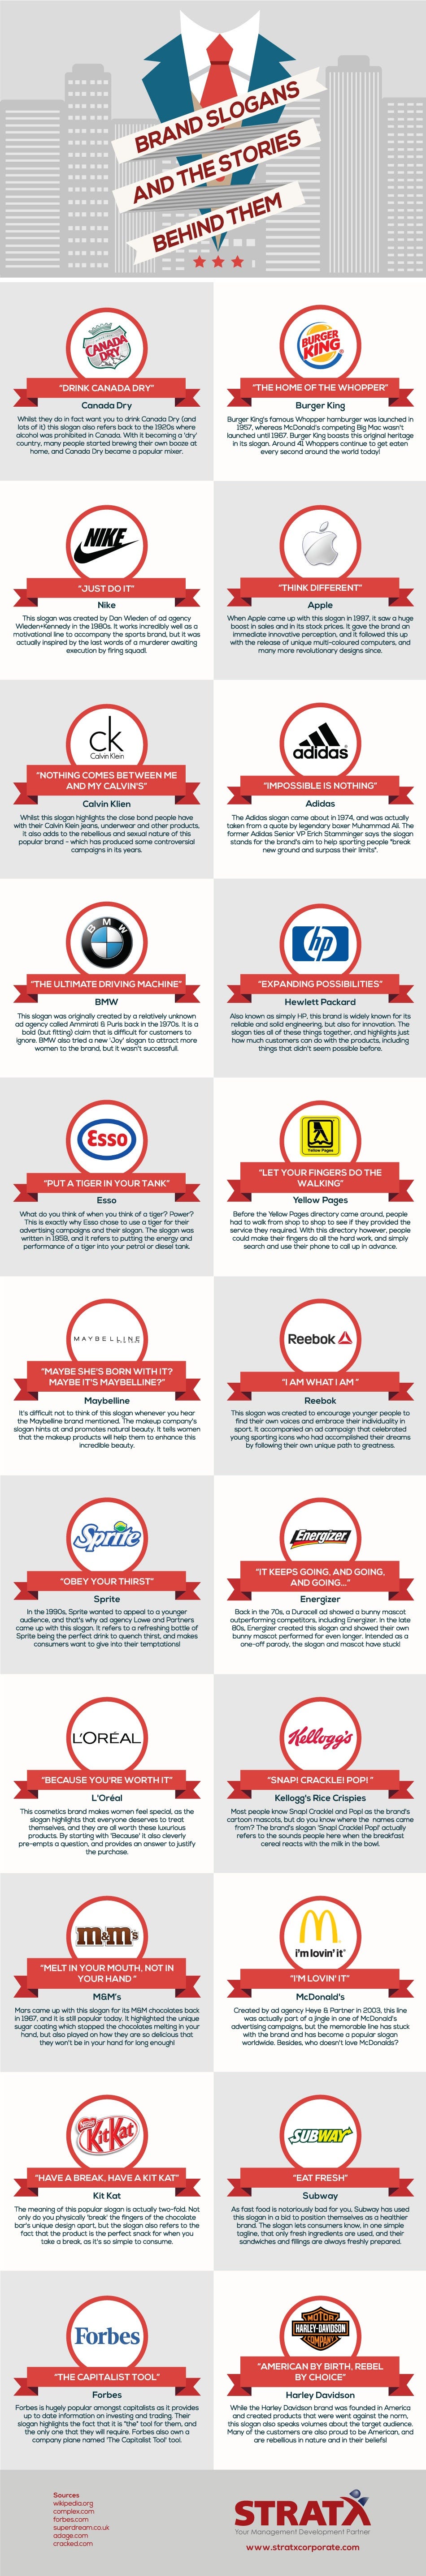 22 Famous Brand Slogans And The Little Known Stories Behind Them By Mastermind Medium